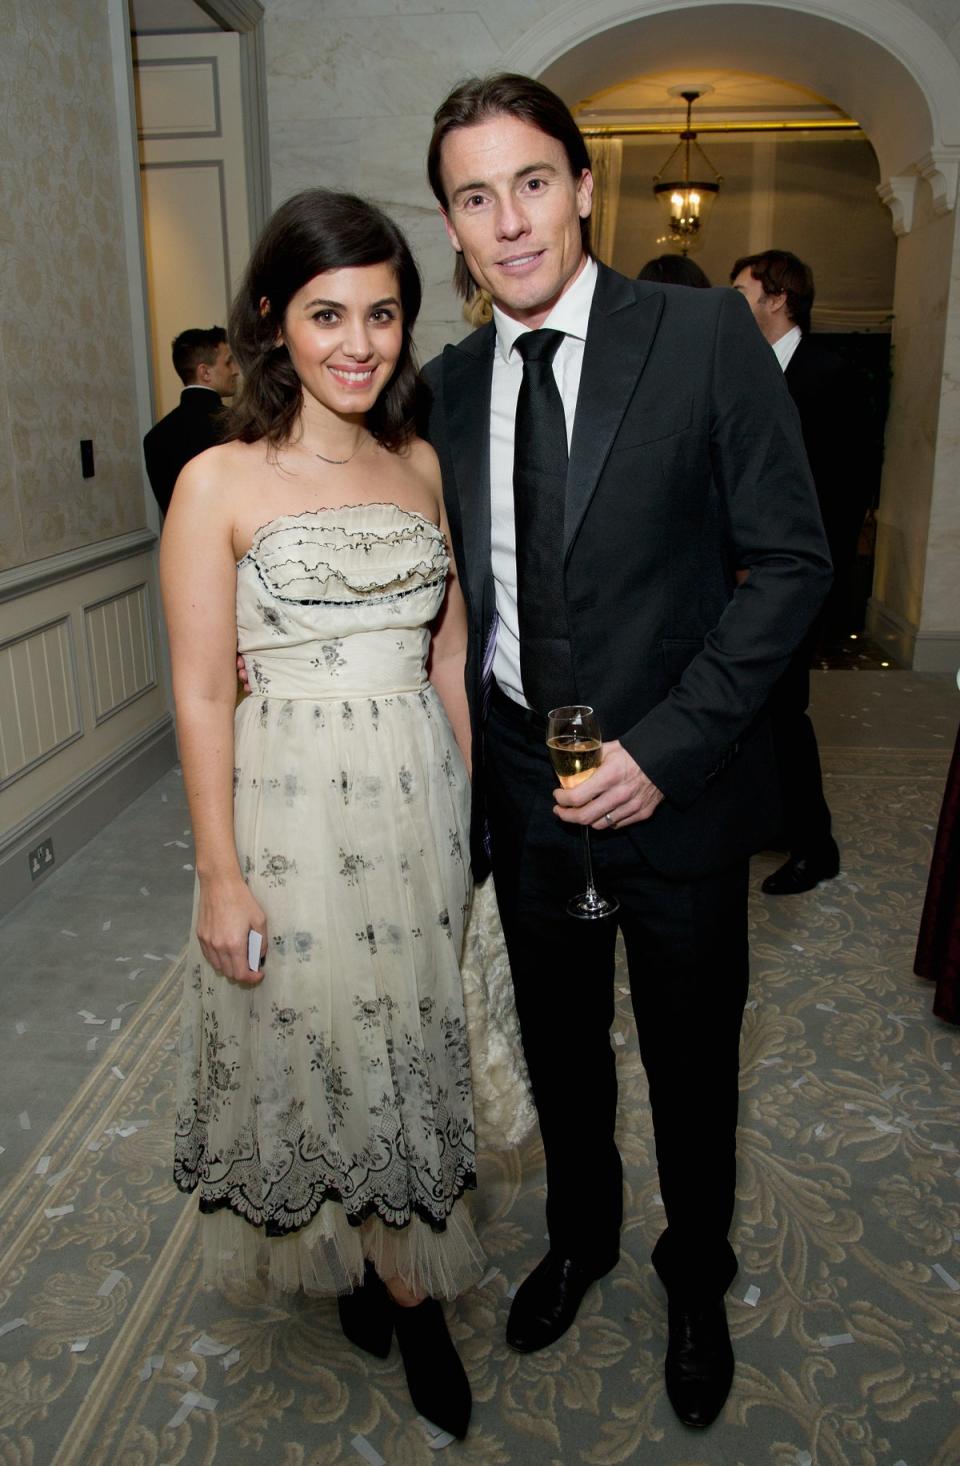 Melua said she doubted she would find love again after she and husband James Toseland (R) divorced in 2020 (Getty Images)